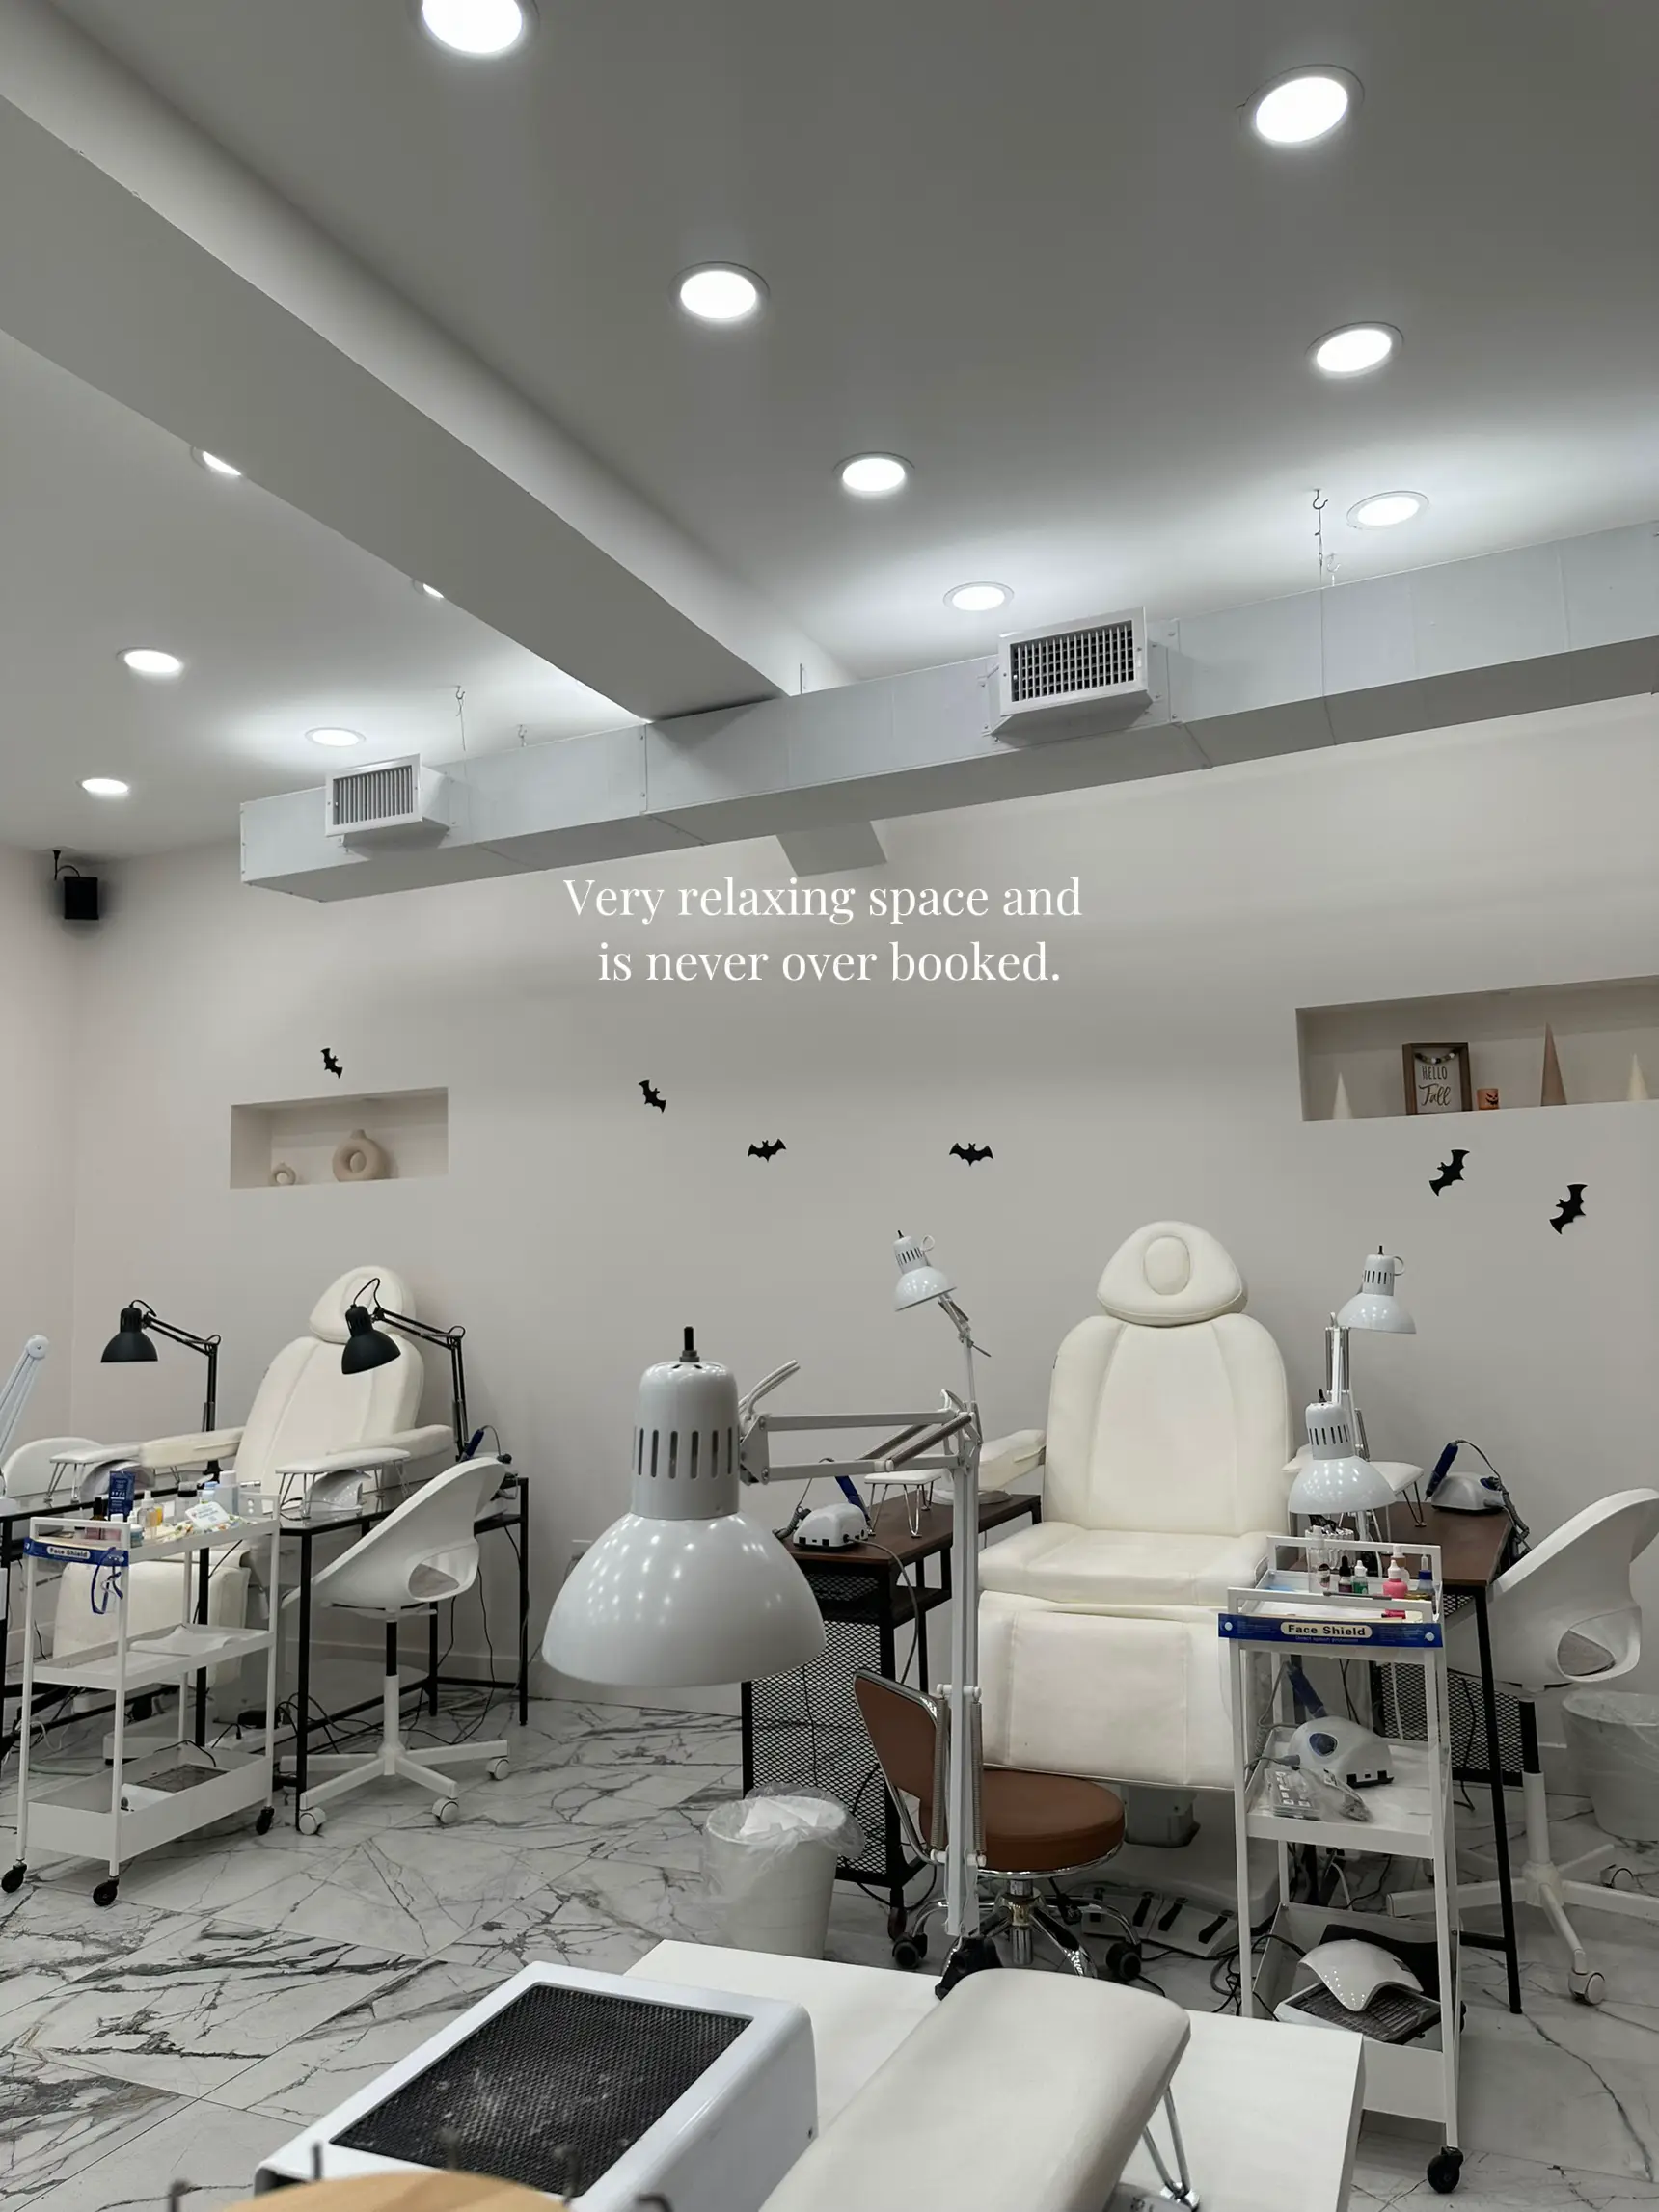  A salon with a white wall and a sign that says "Very relaxing space and is never over booked".